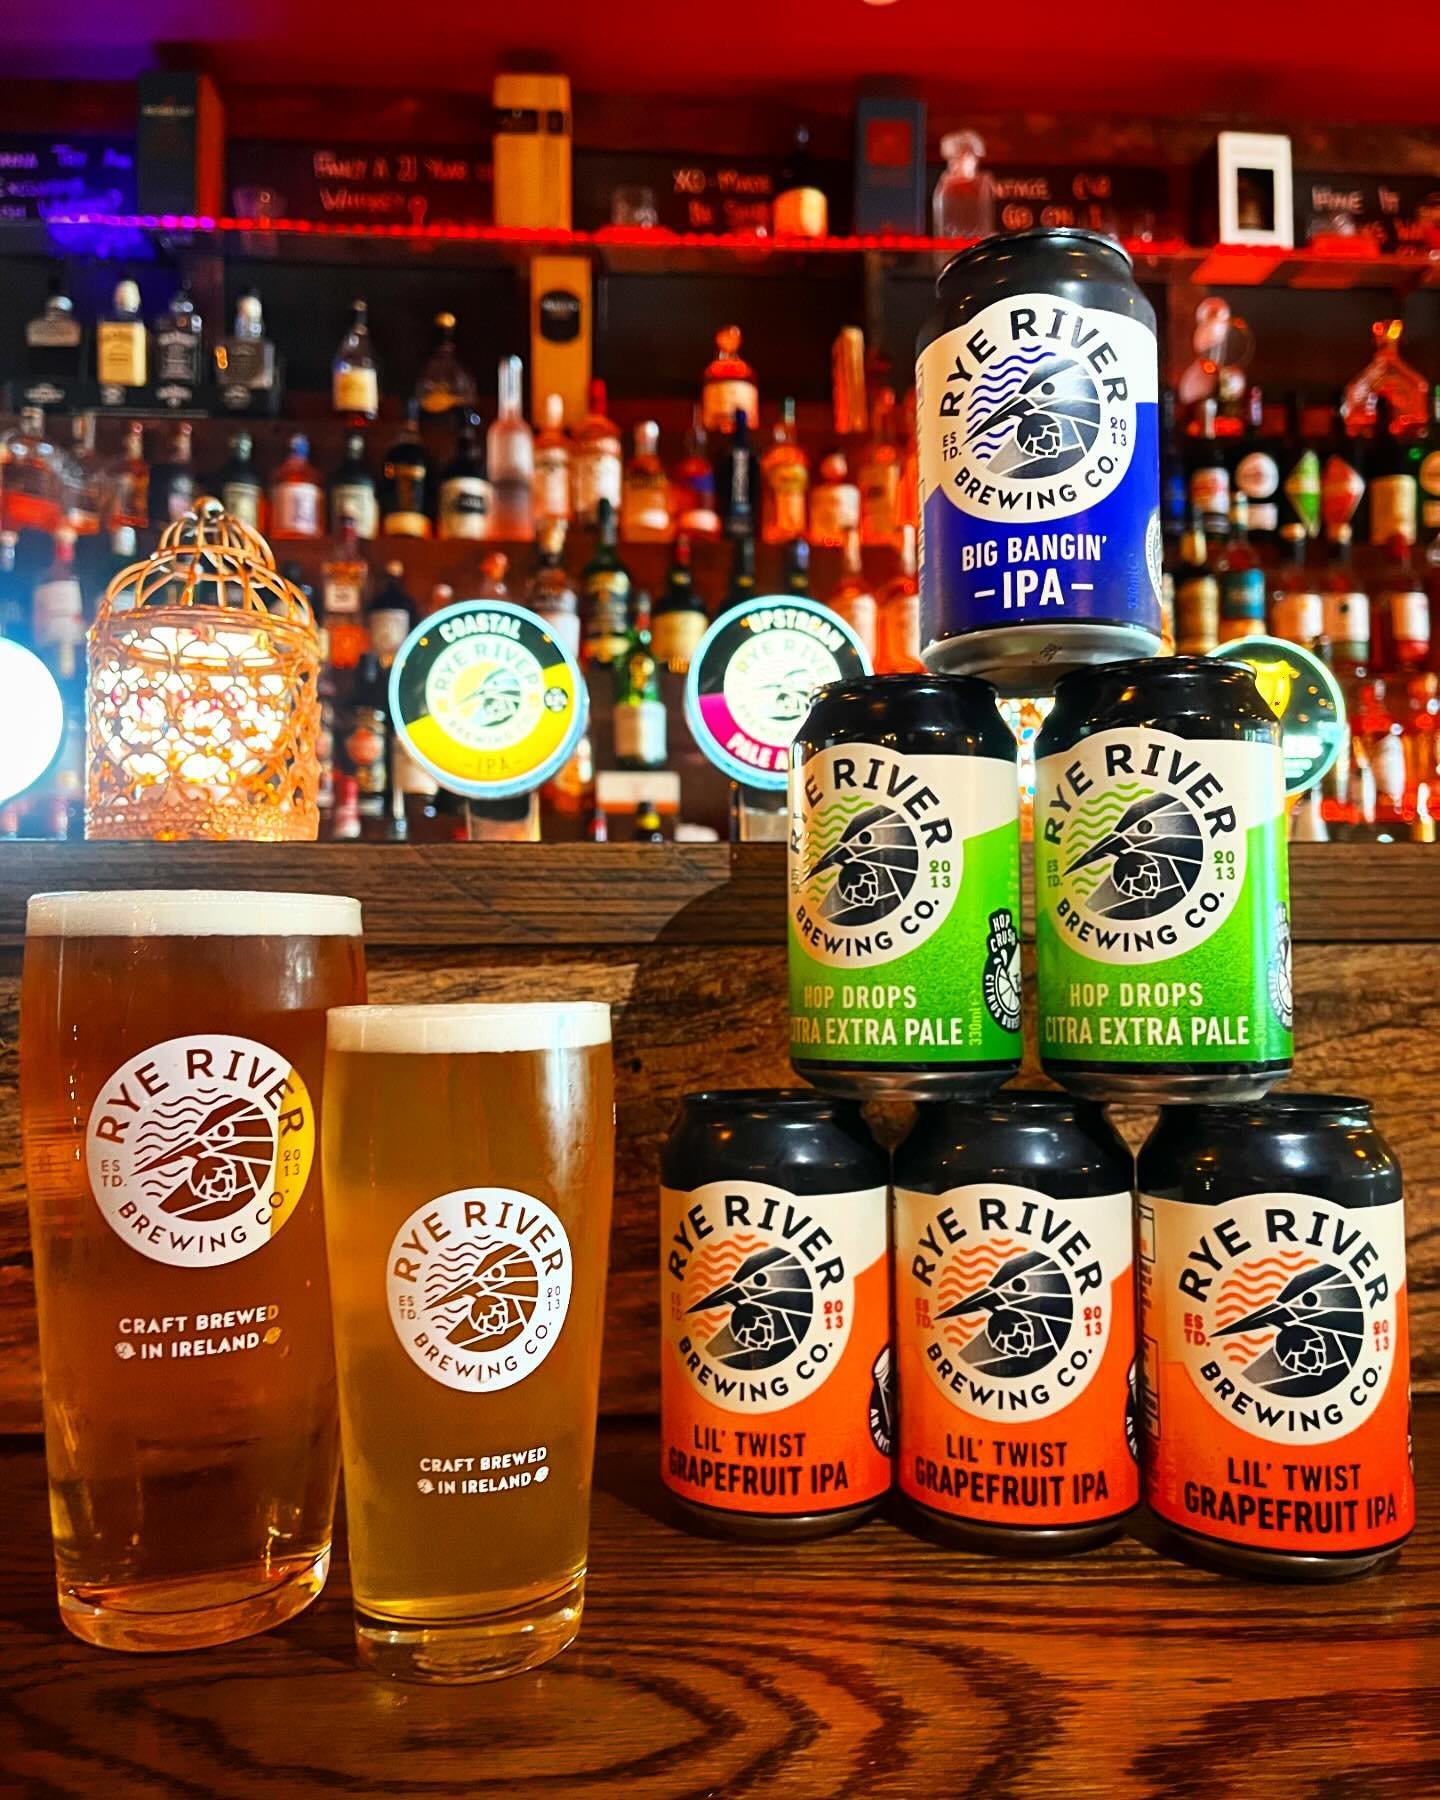 Did you know ⁉️ @ryeriverbrewingco Is the most Decorated Craft Brewery in the World 🌎 
Available always in Buffalo Boy. Irish Craft Beer at its Finest 🙌 
#buffaloboysteakhouse #carrickonshannon #leitrim #leitrimtourism #leitrimobserver #leitrimbusi